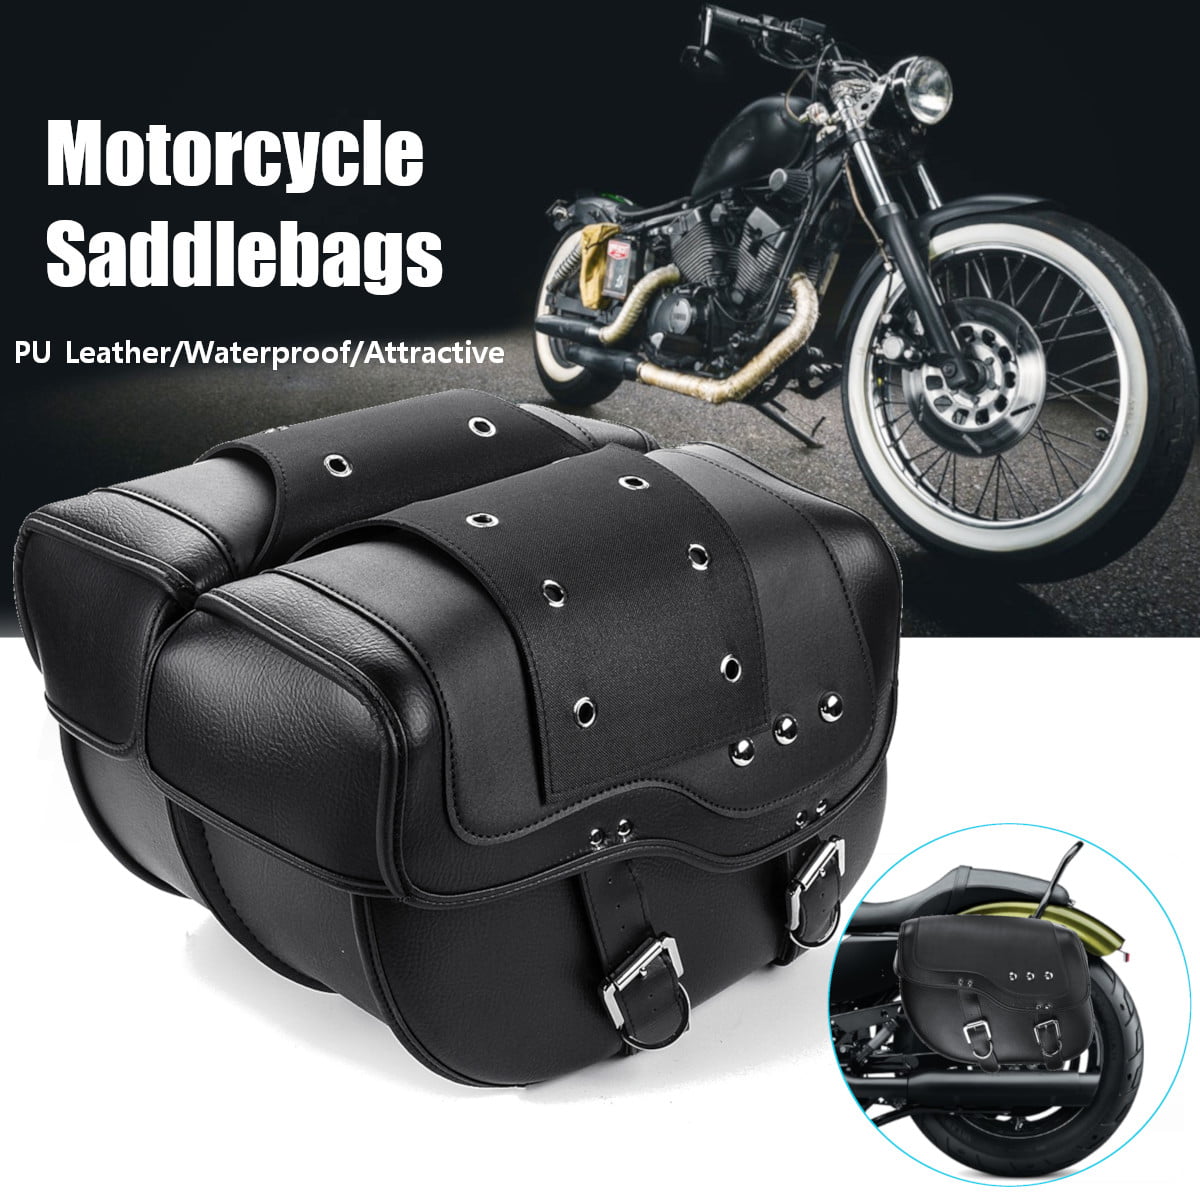 Honda Bikes 16" x 12" Large Zip-Off Throw Over PVC Saddle Bags for Harley